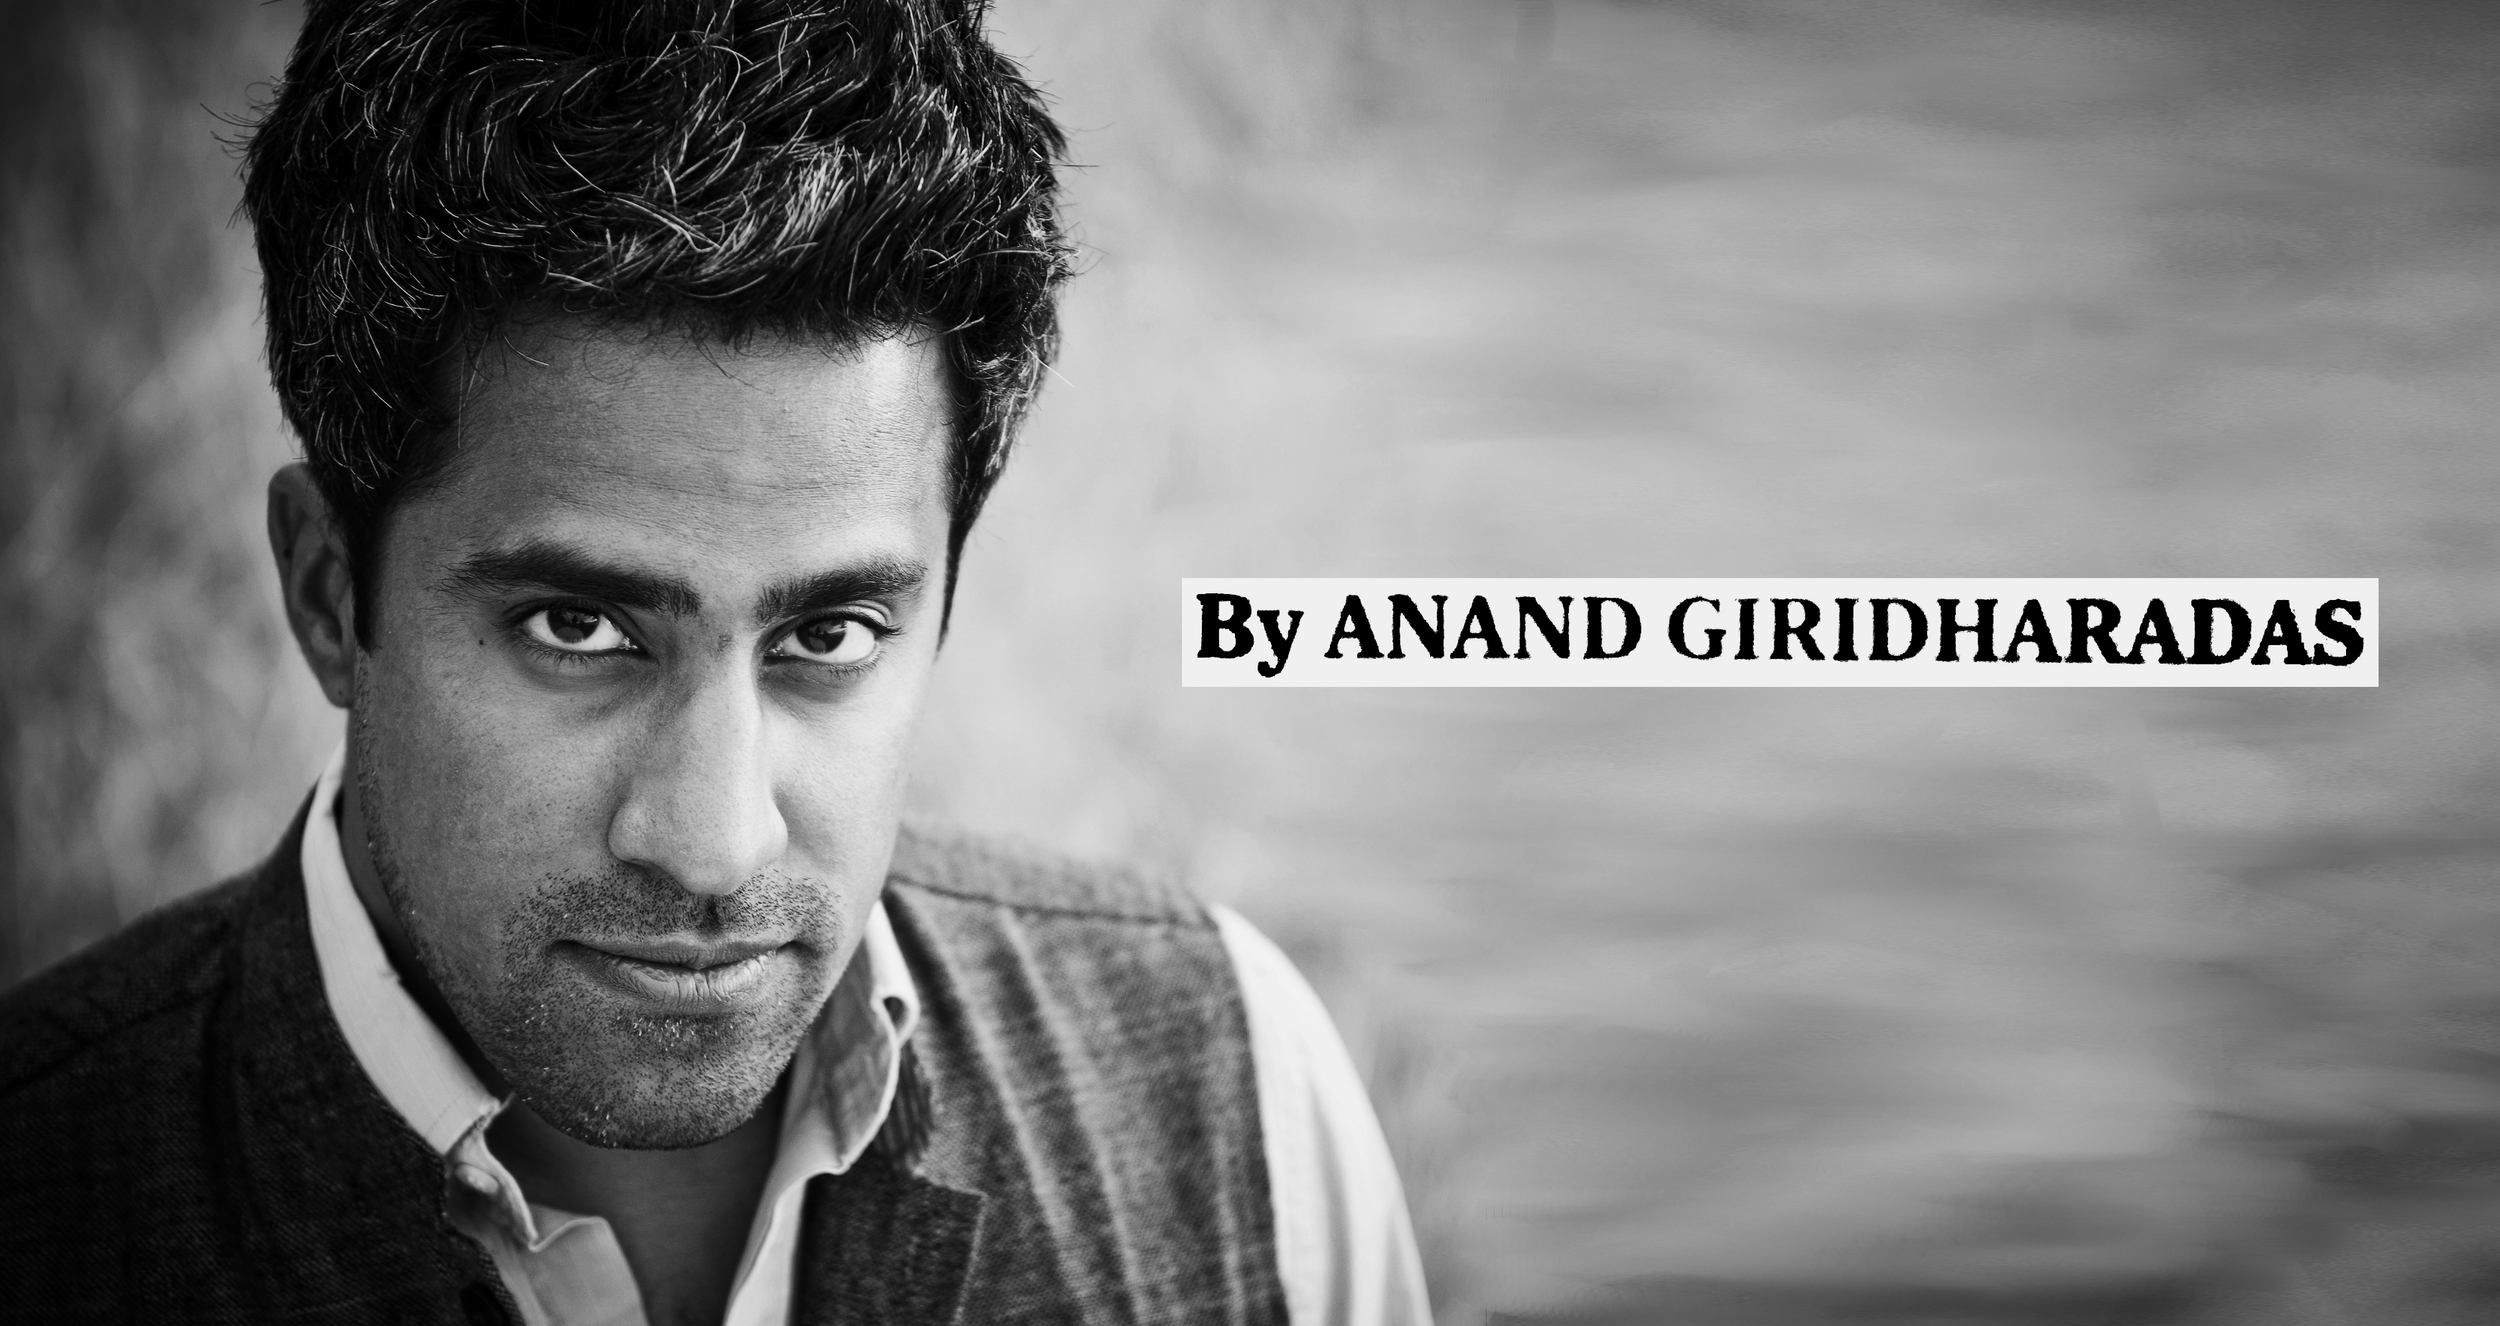 Picture of anand giridharadas- black and white